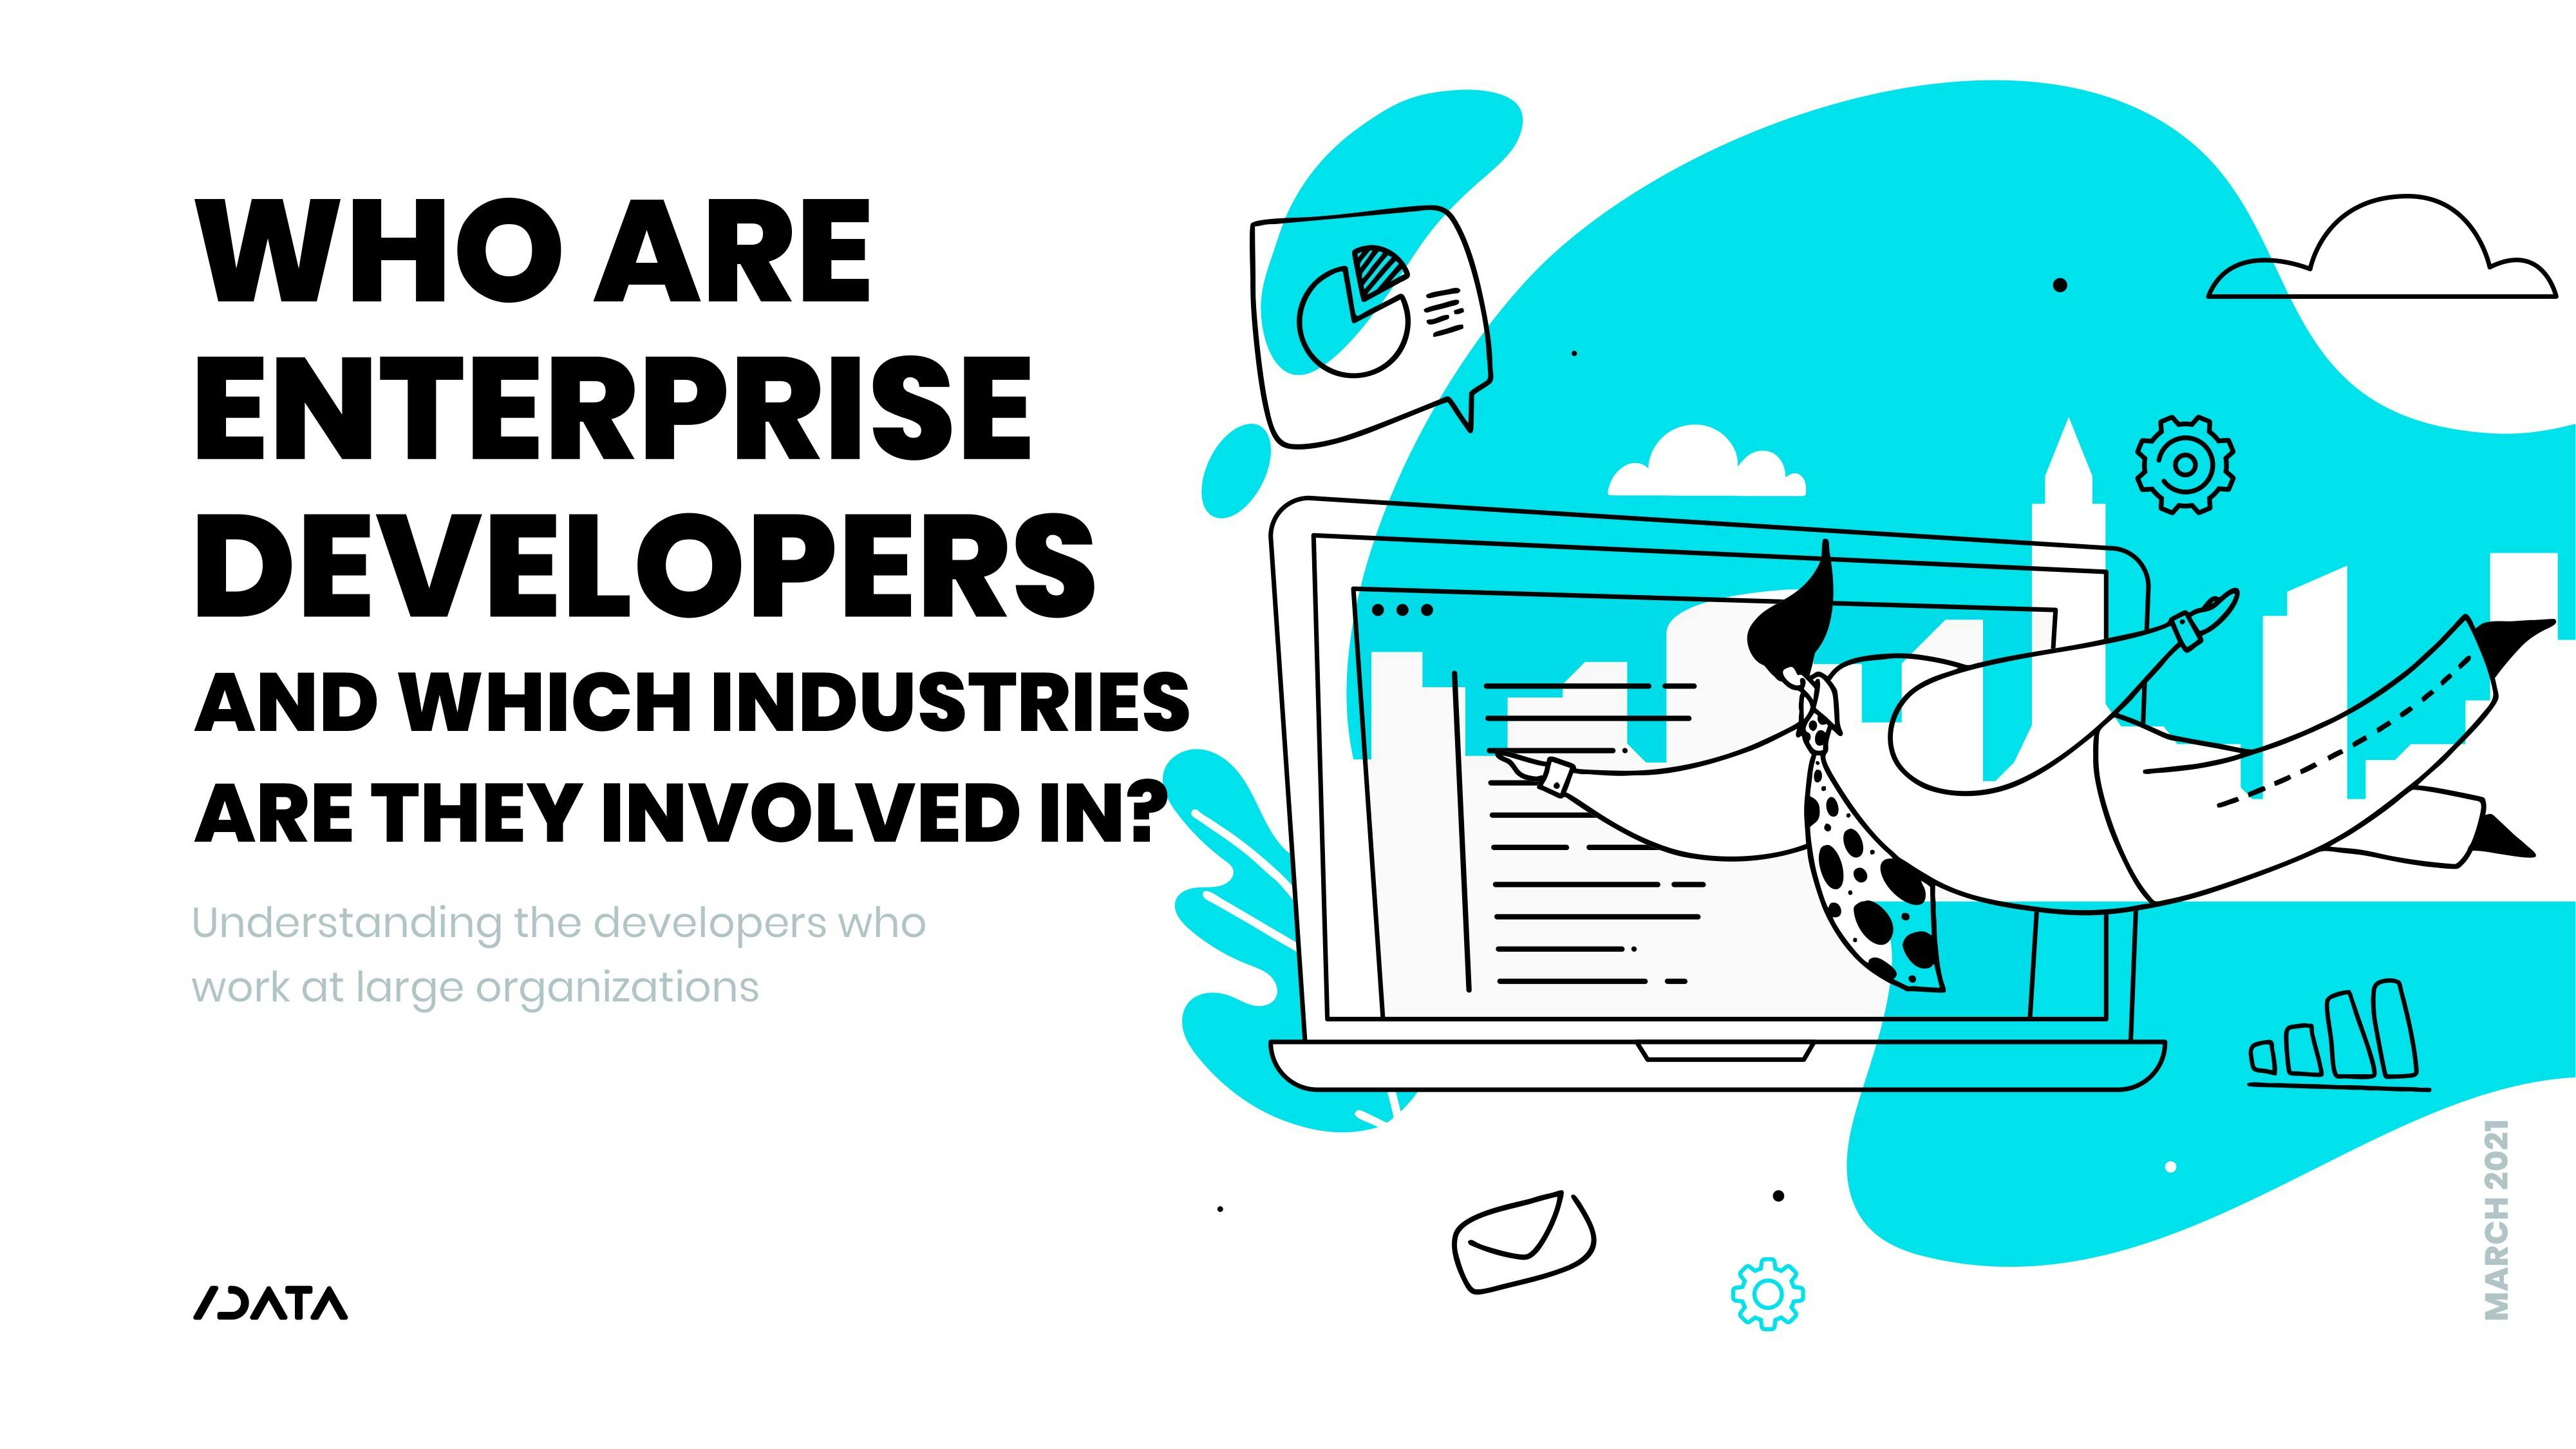 Who are Enterprise Developers? - Q1 2021